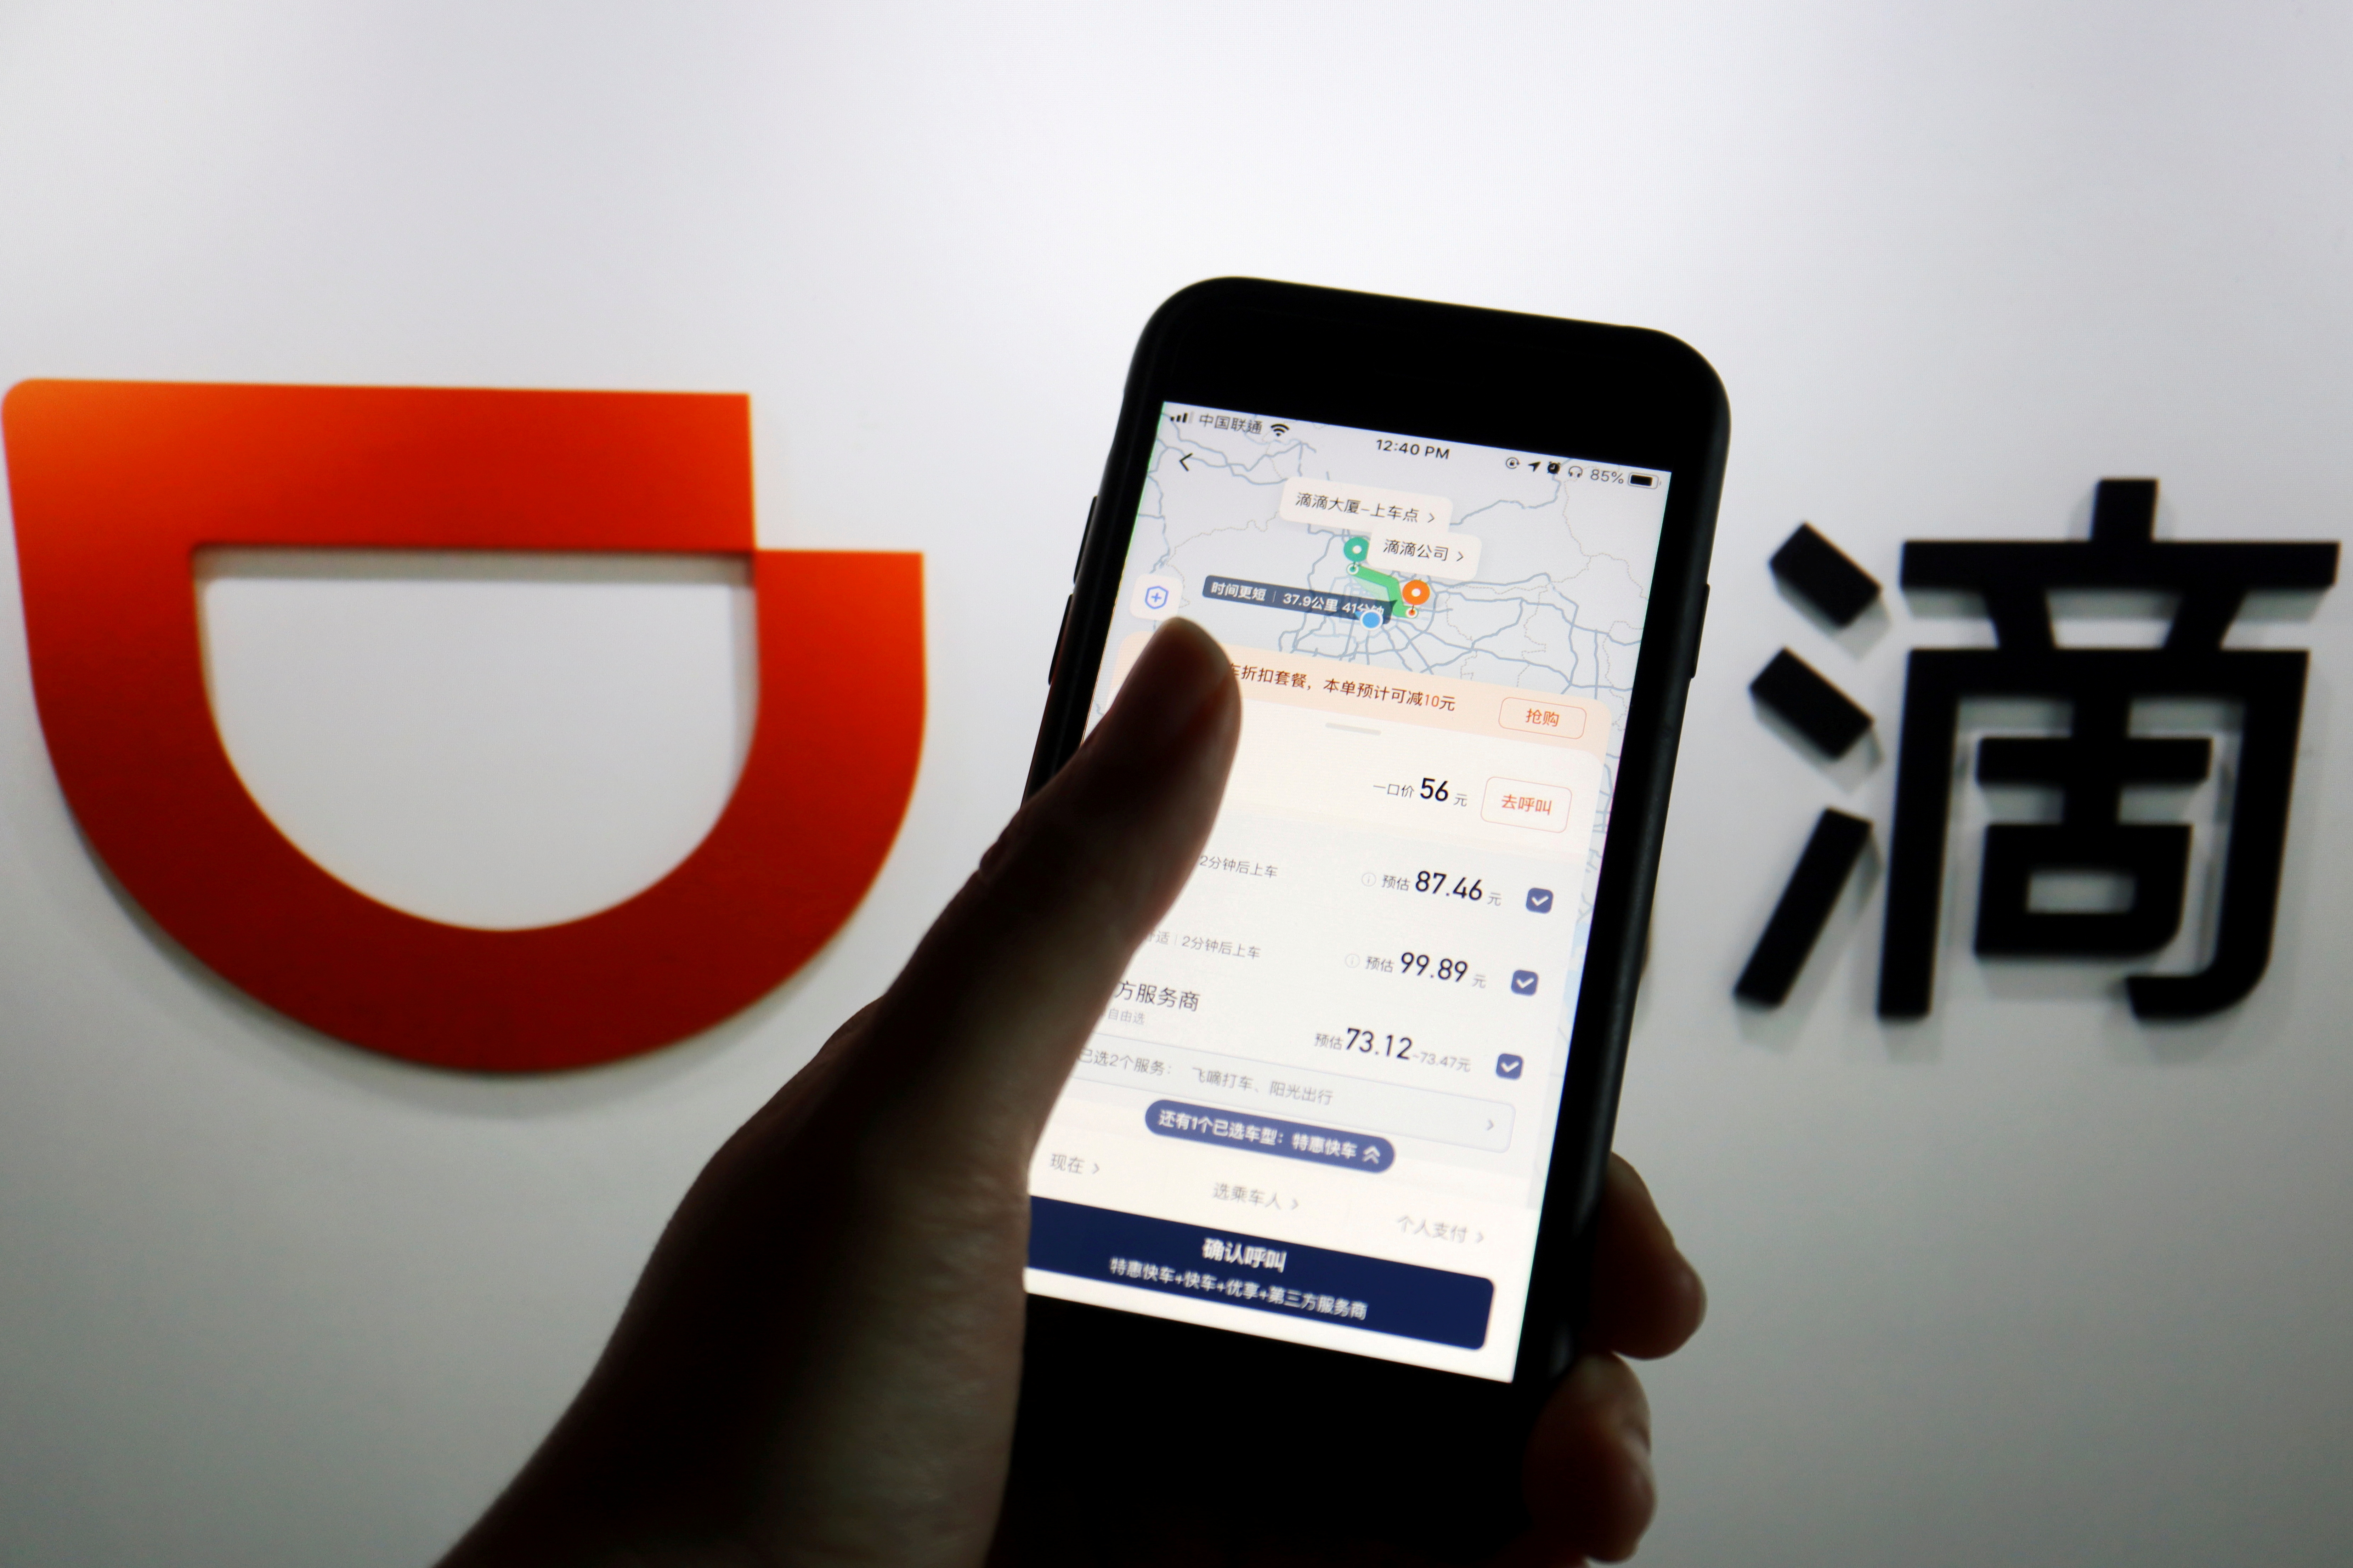 File photo: The app of Chinese ride-hailing giant Didi is seen on a mobile phone in front of the company logo displayed in this illustration picture taken July 1, 2021. REUTERS/Florence Lo